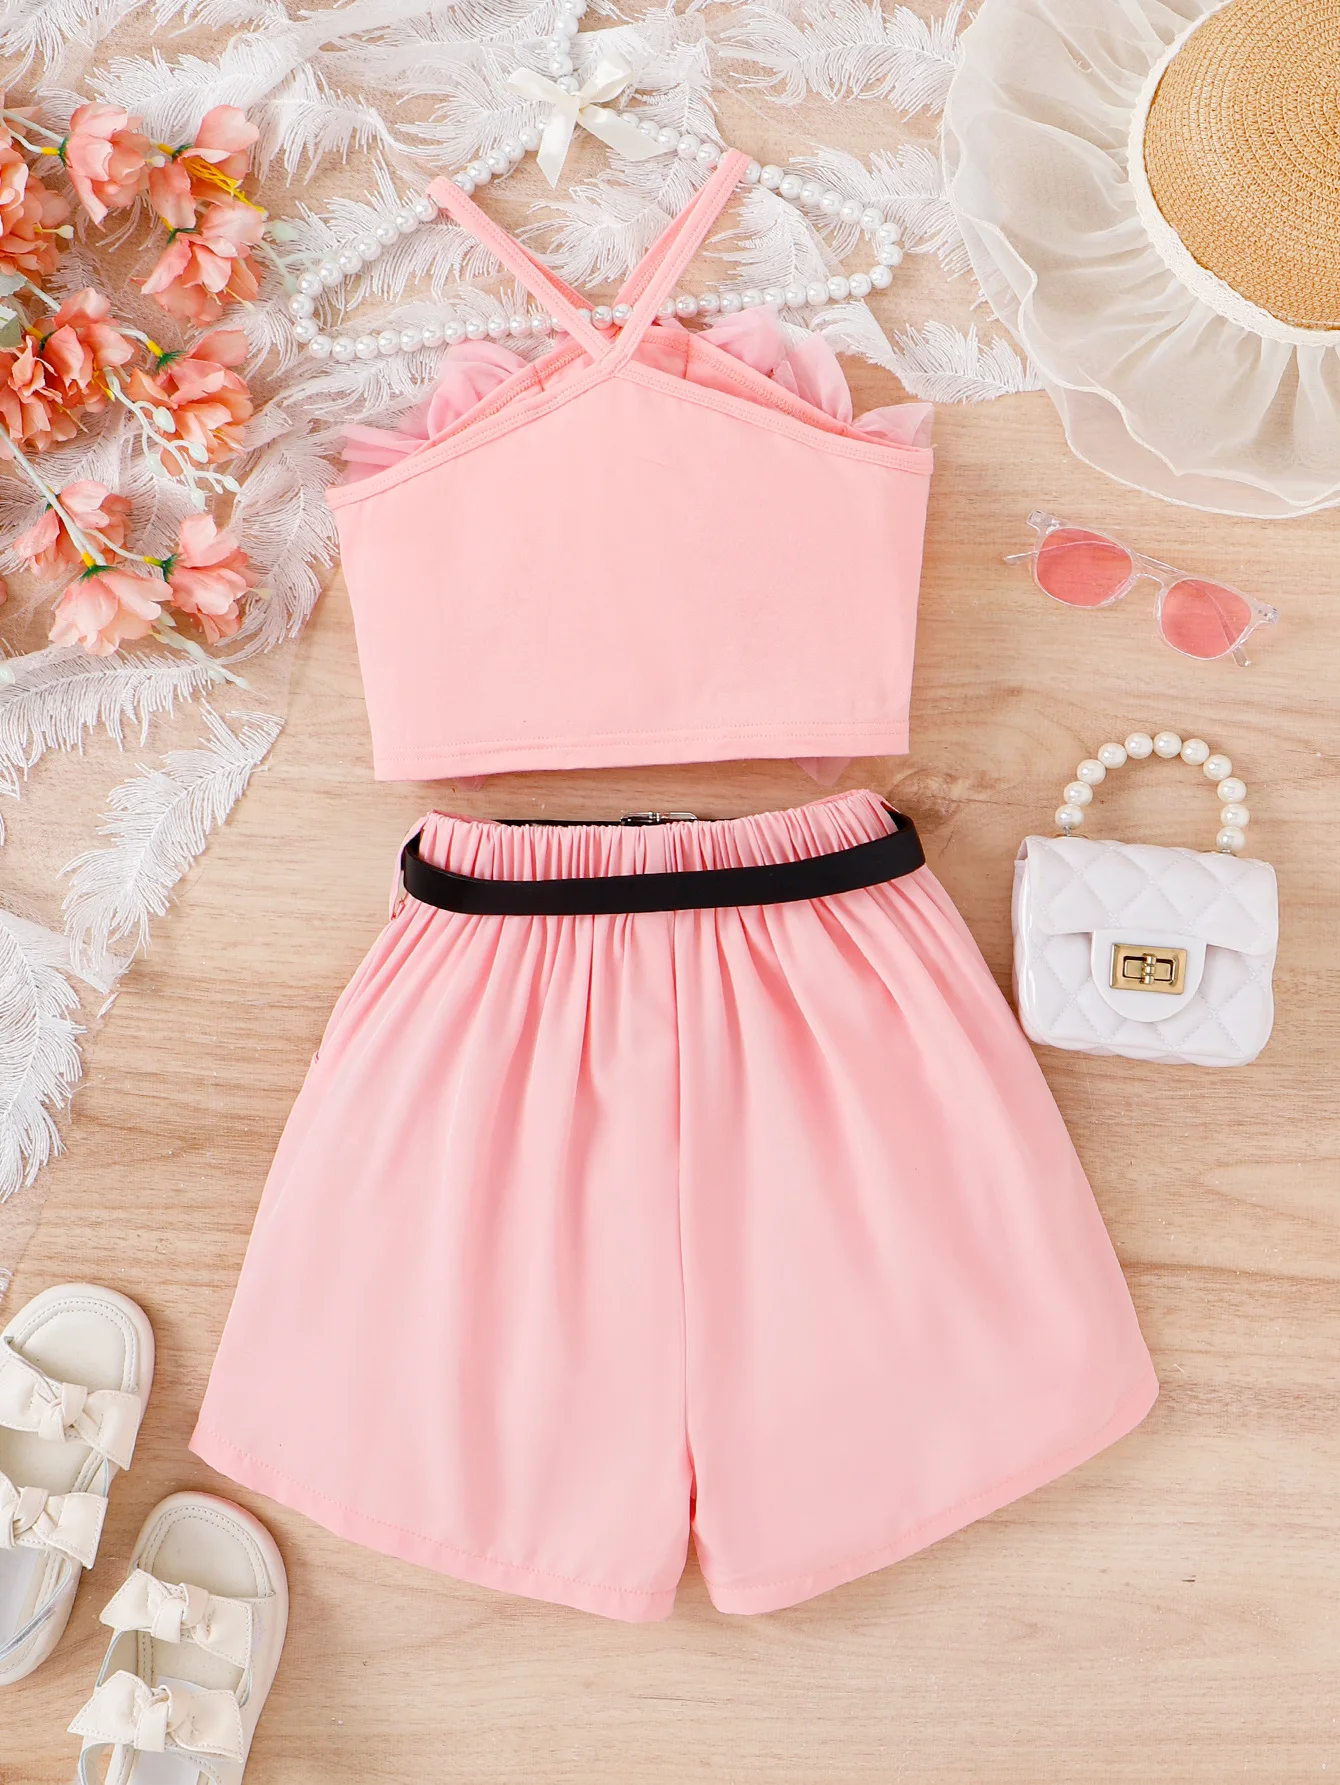 Wholesale summer girls clothes sleeveless shirt tops+shorts with belt boutique two piece children kids clothing sets